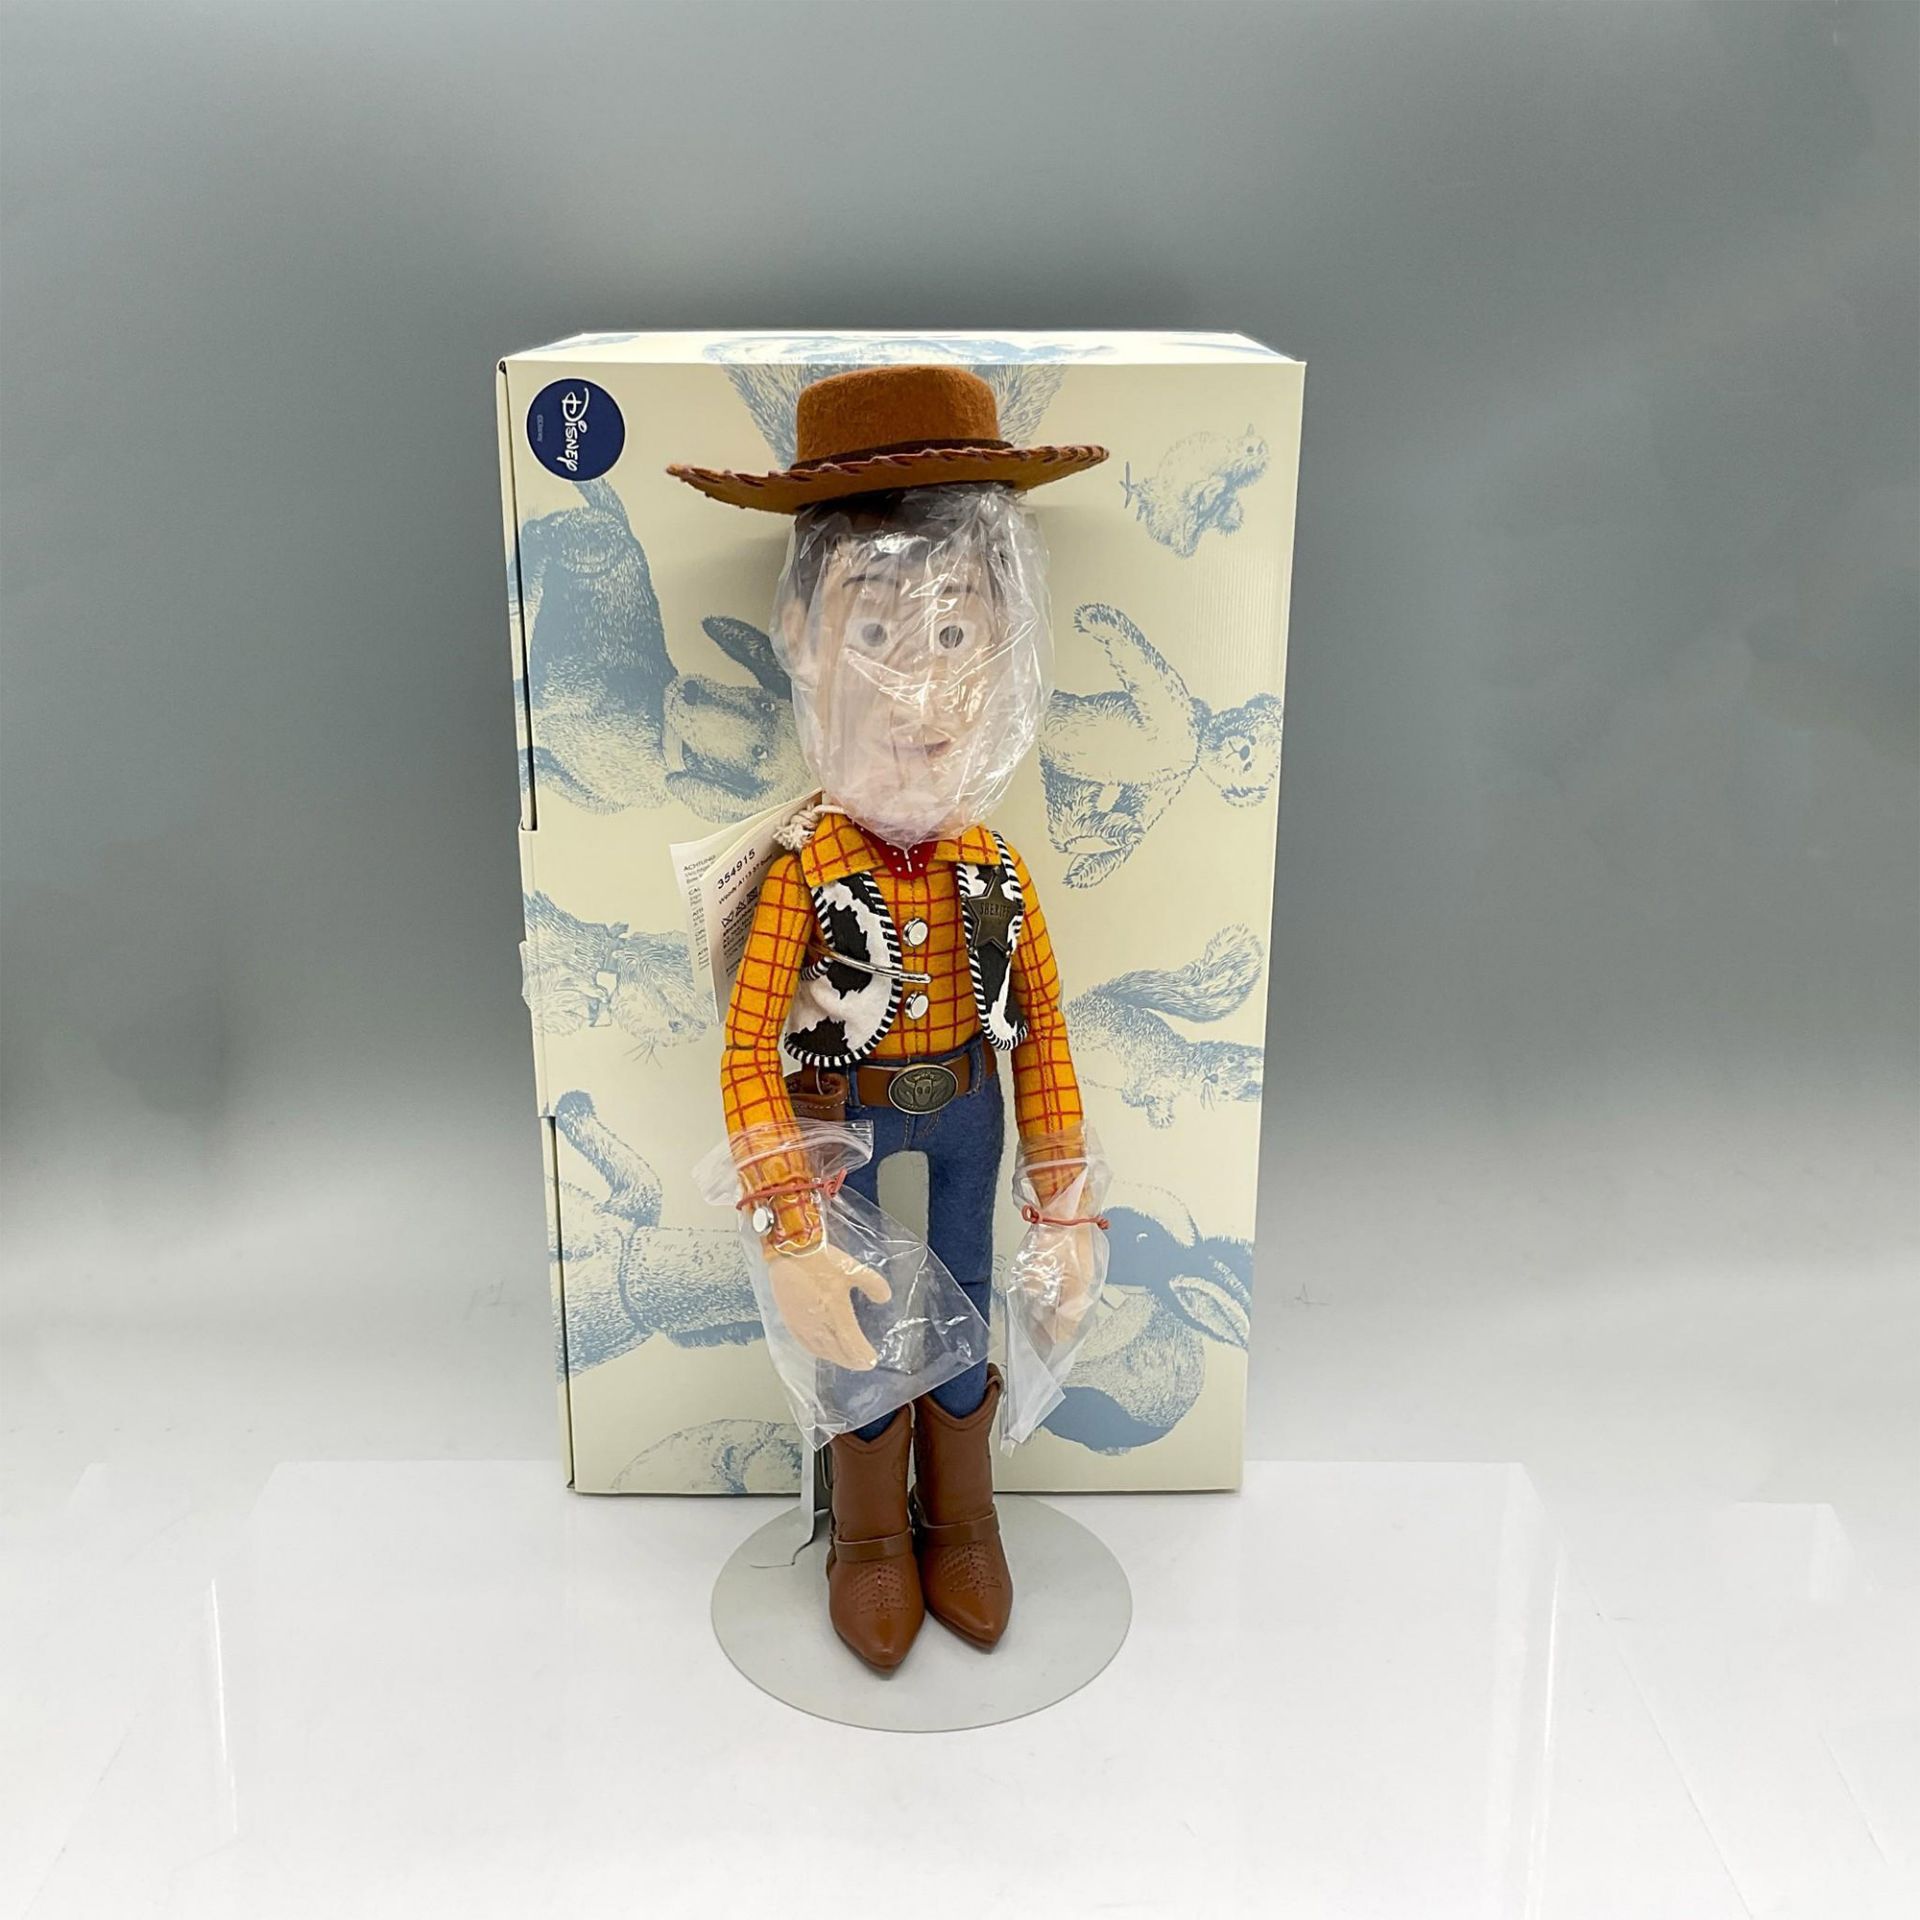 Steiff Character, Woody from Disney/Pixar's Toy Story - Image 12 of 12